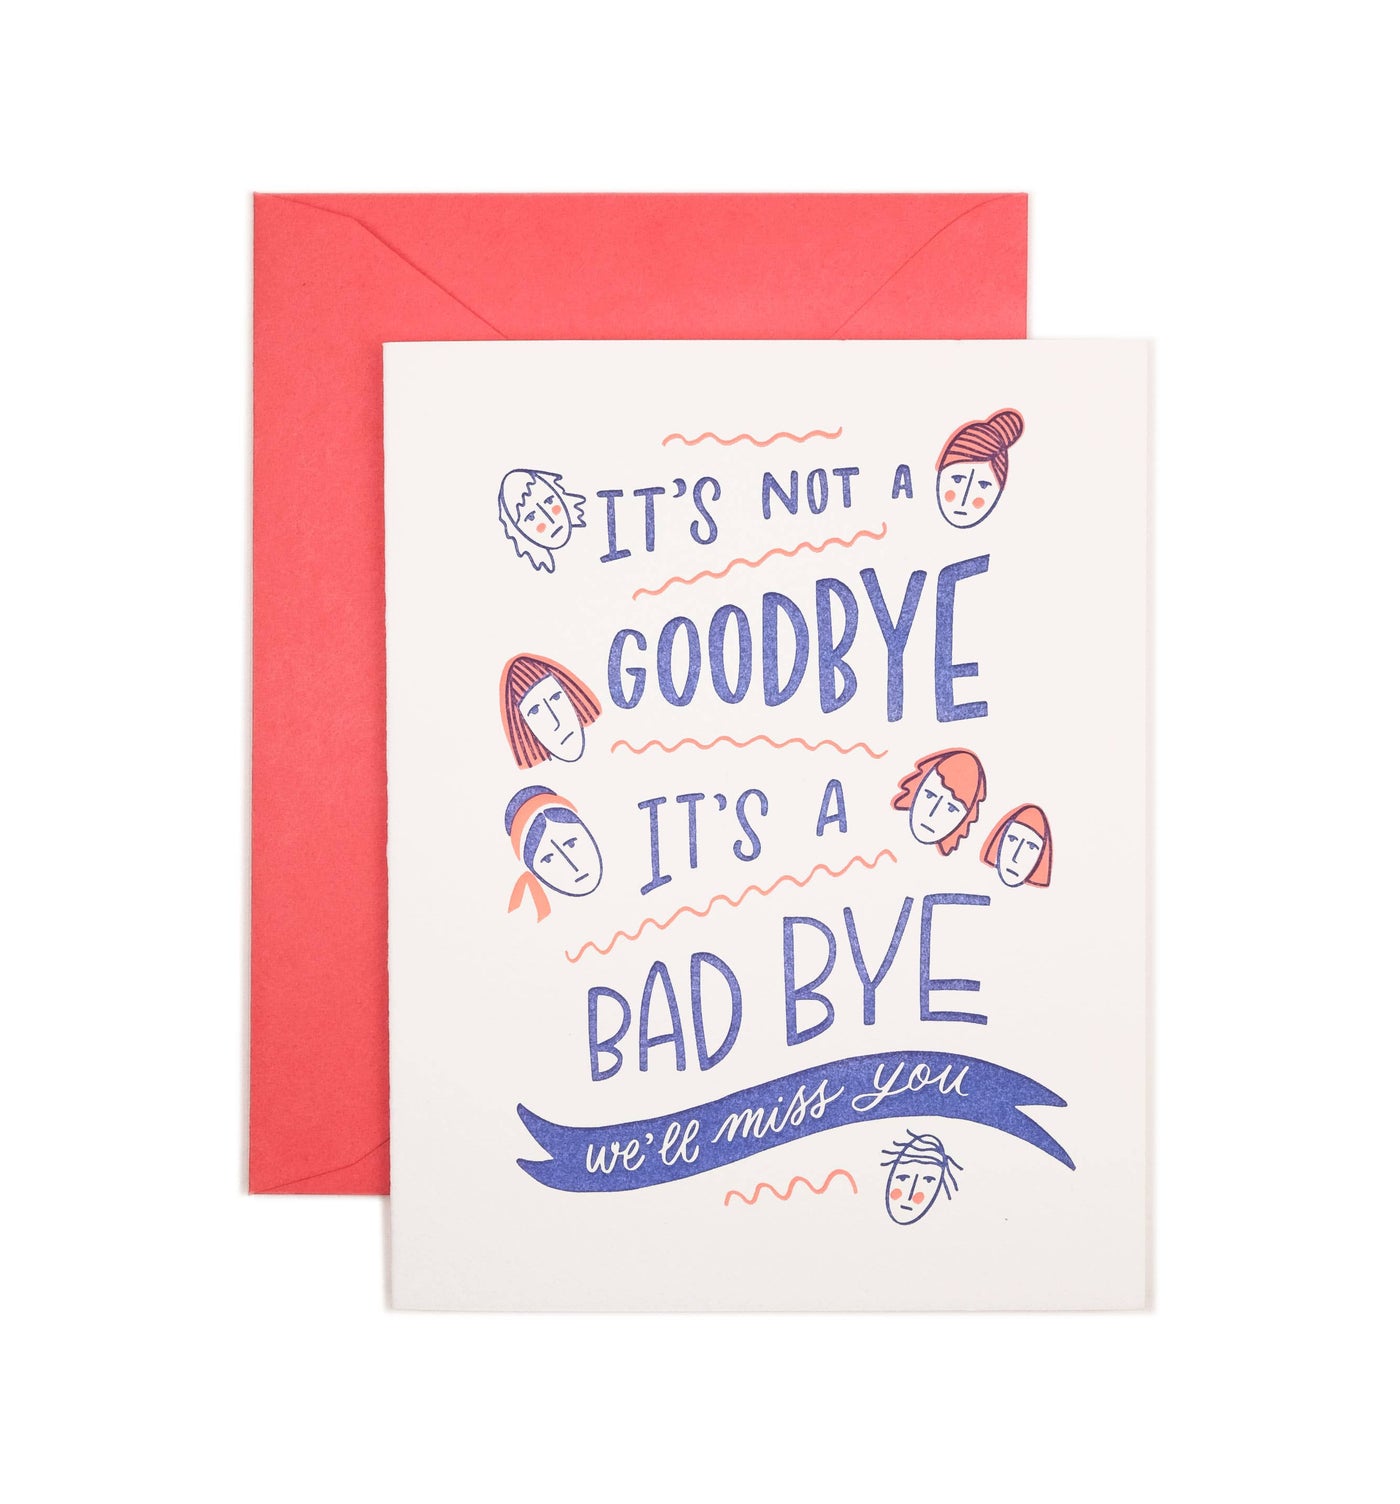 We'll Miss You Greeting Card